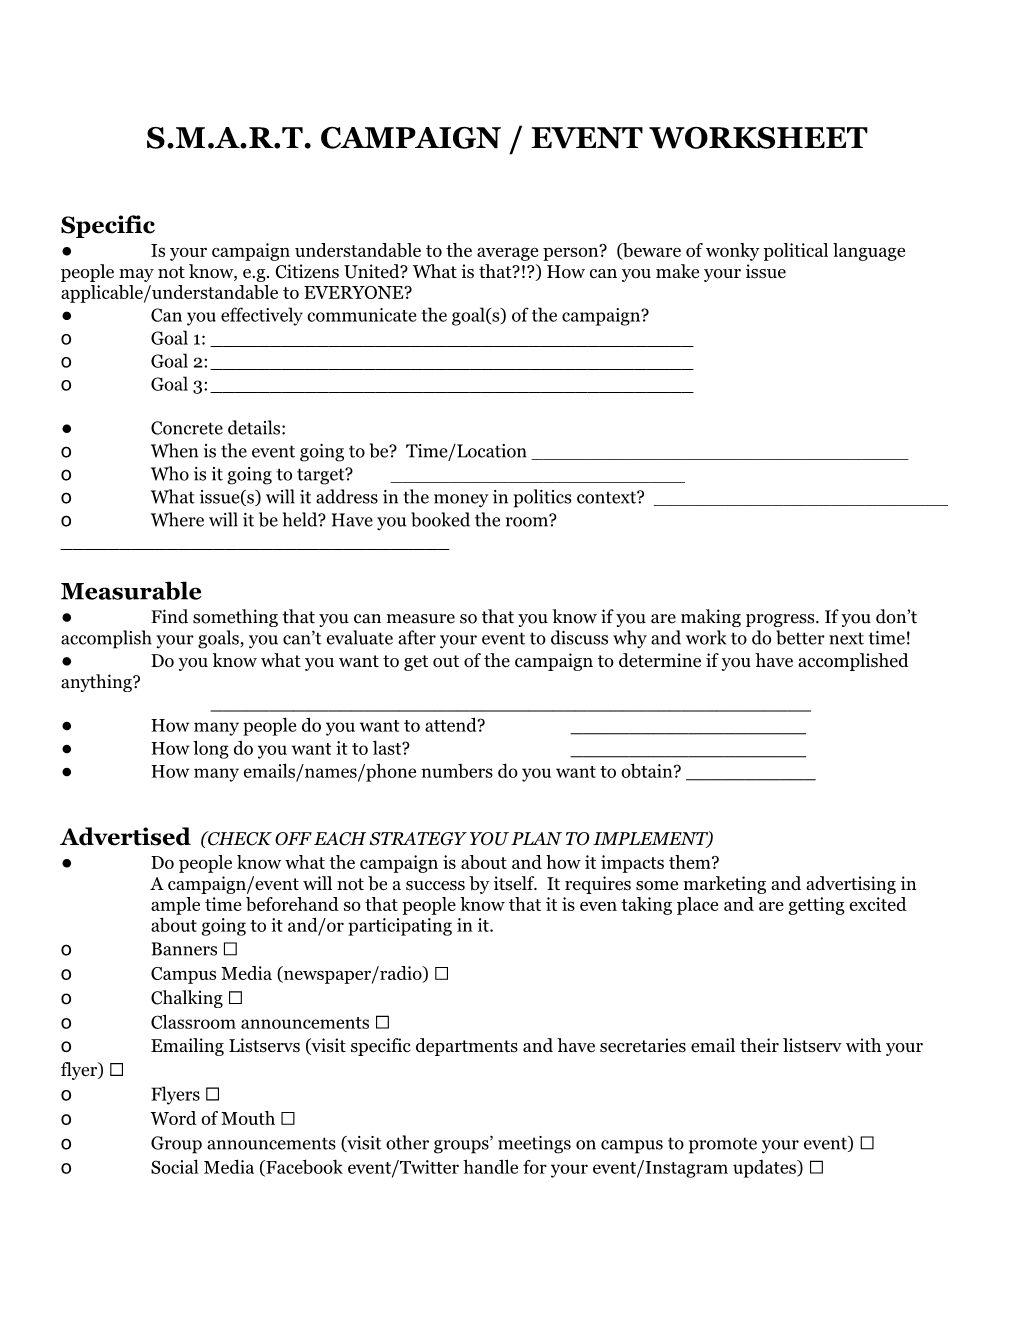 S.M.A.R.T. Campaign / Event Worksheet